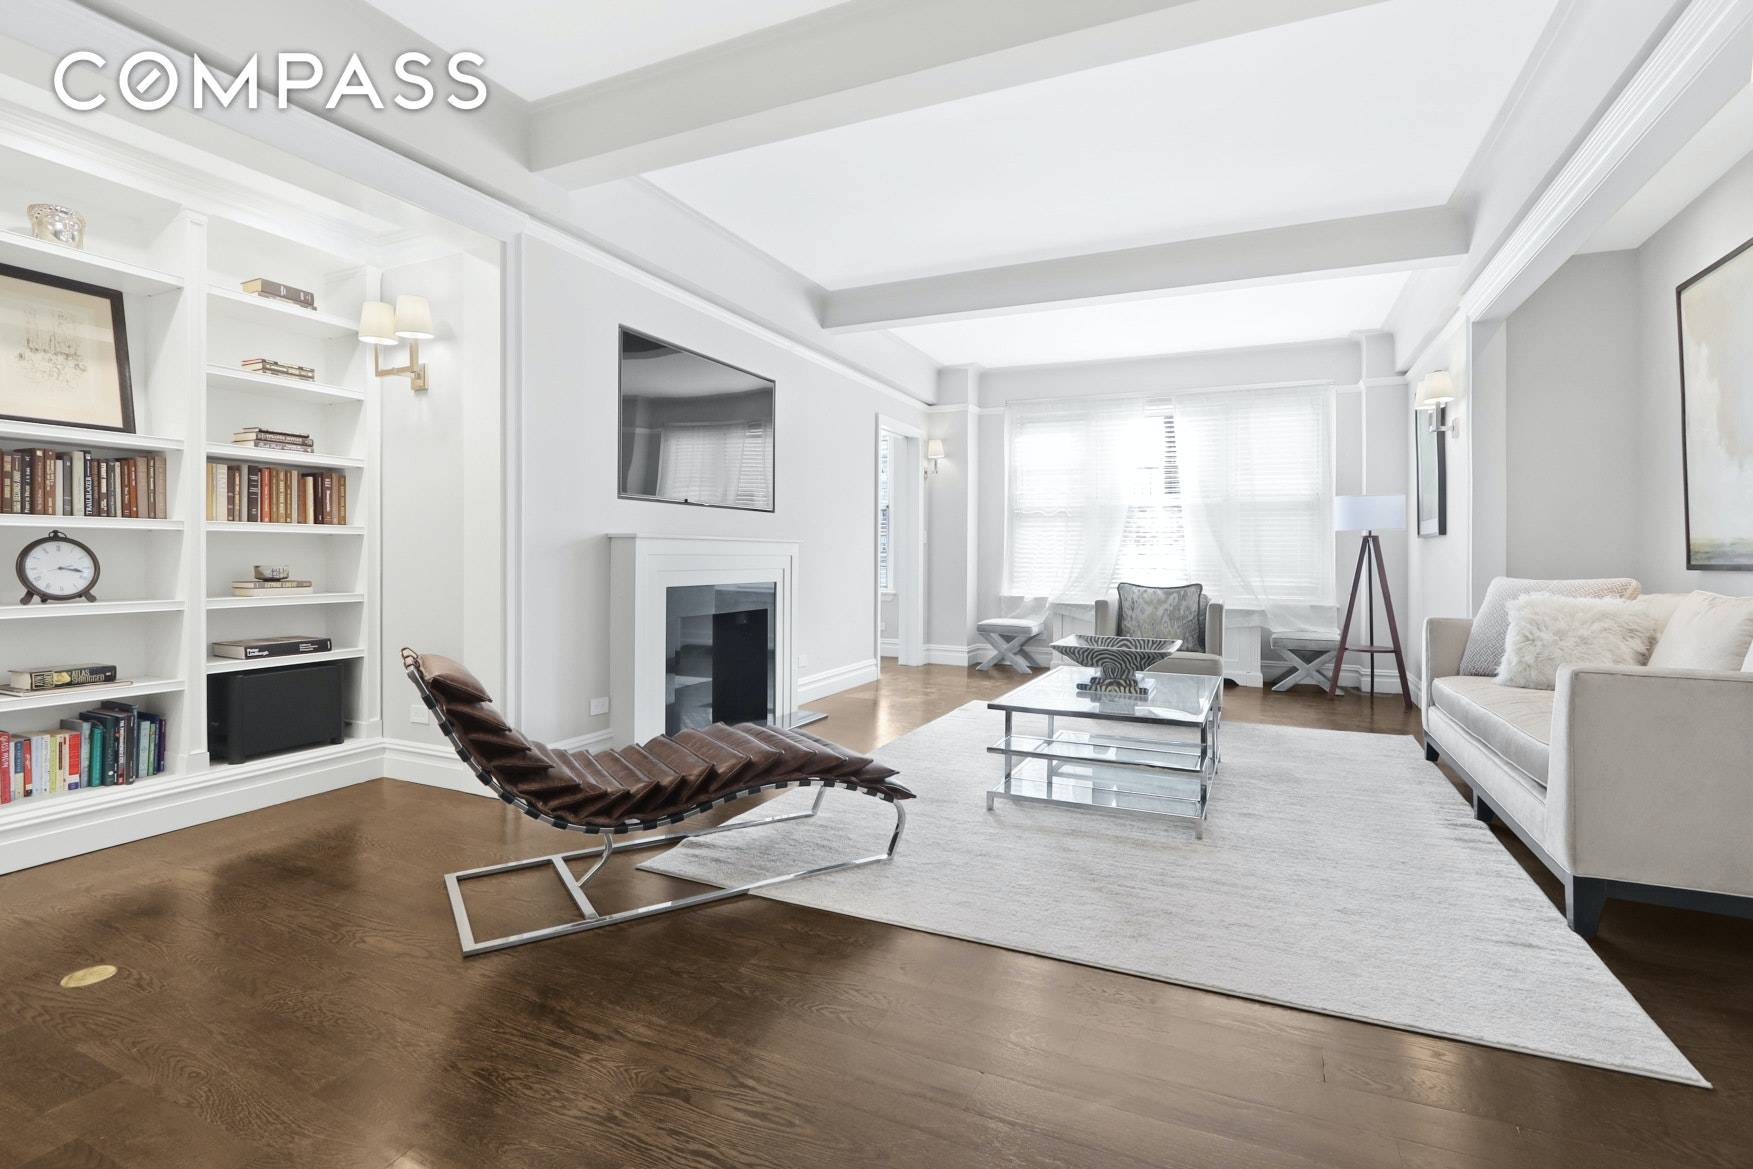 BETTER THAN NEW DEVELOPMENT GRAND DOUBLE CORNER EXPANSIVE RENOVATED STUNNER Estimated at 2800SF FRESH, DESIGNER, RAMBLING RESIDENCE IN PRIZED PRE WAR BUILDING Owners painstakingly reinvented and reimagined this gorgeous pre ...